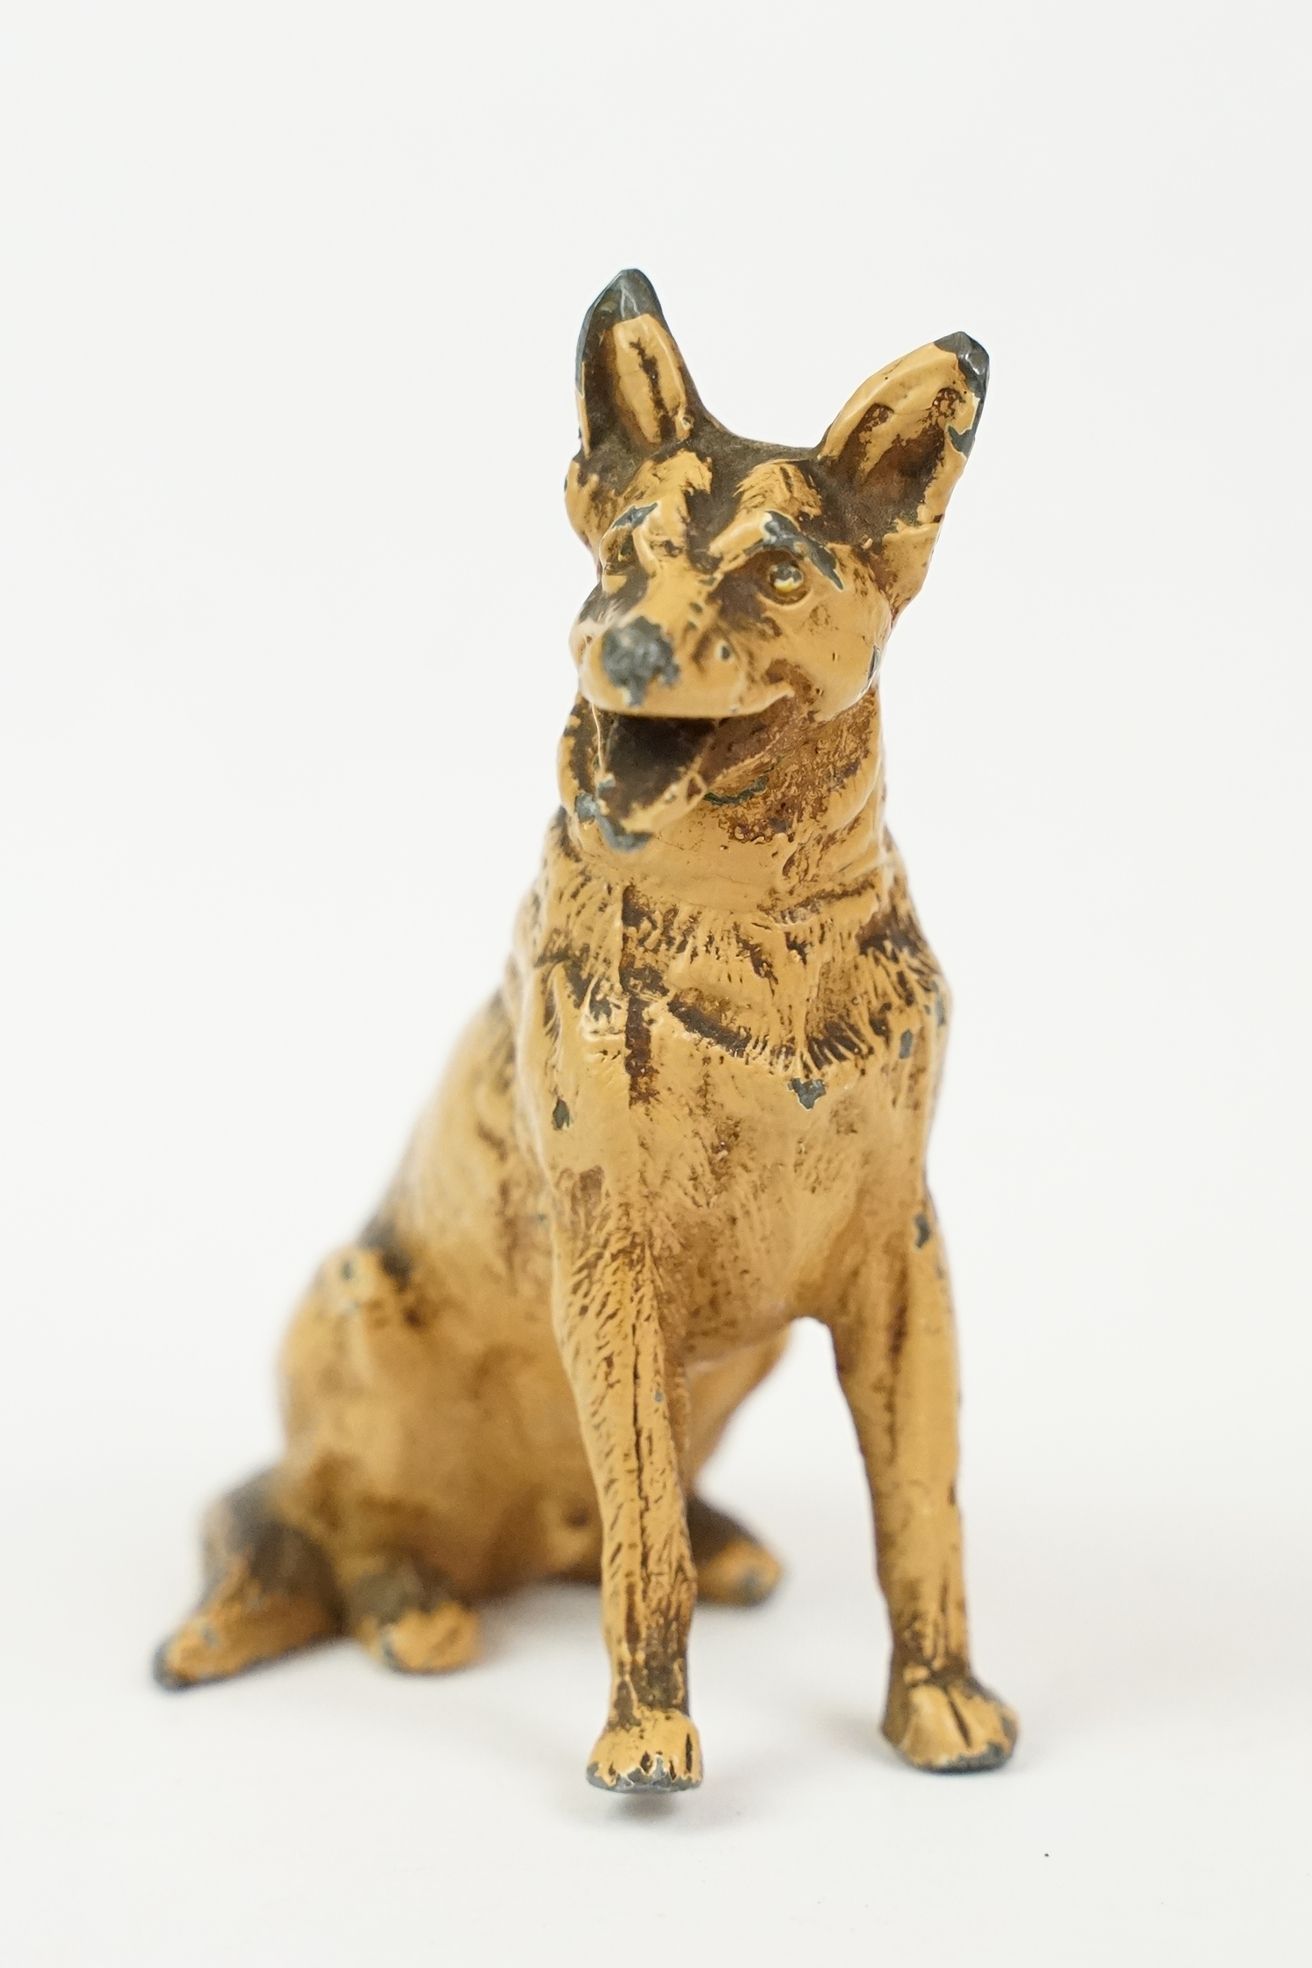 Austrian style Cold Painted Model of a Seated Alsatian / German Shepherd Dog, 3" tall - Image 2 of 6